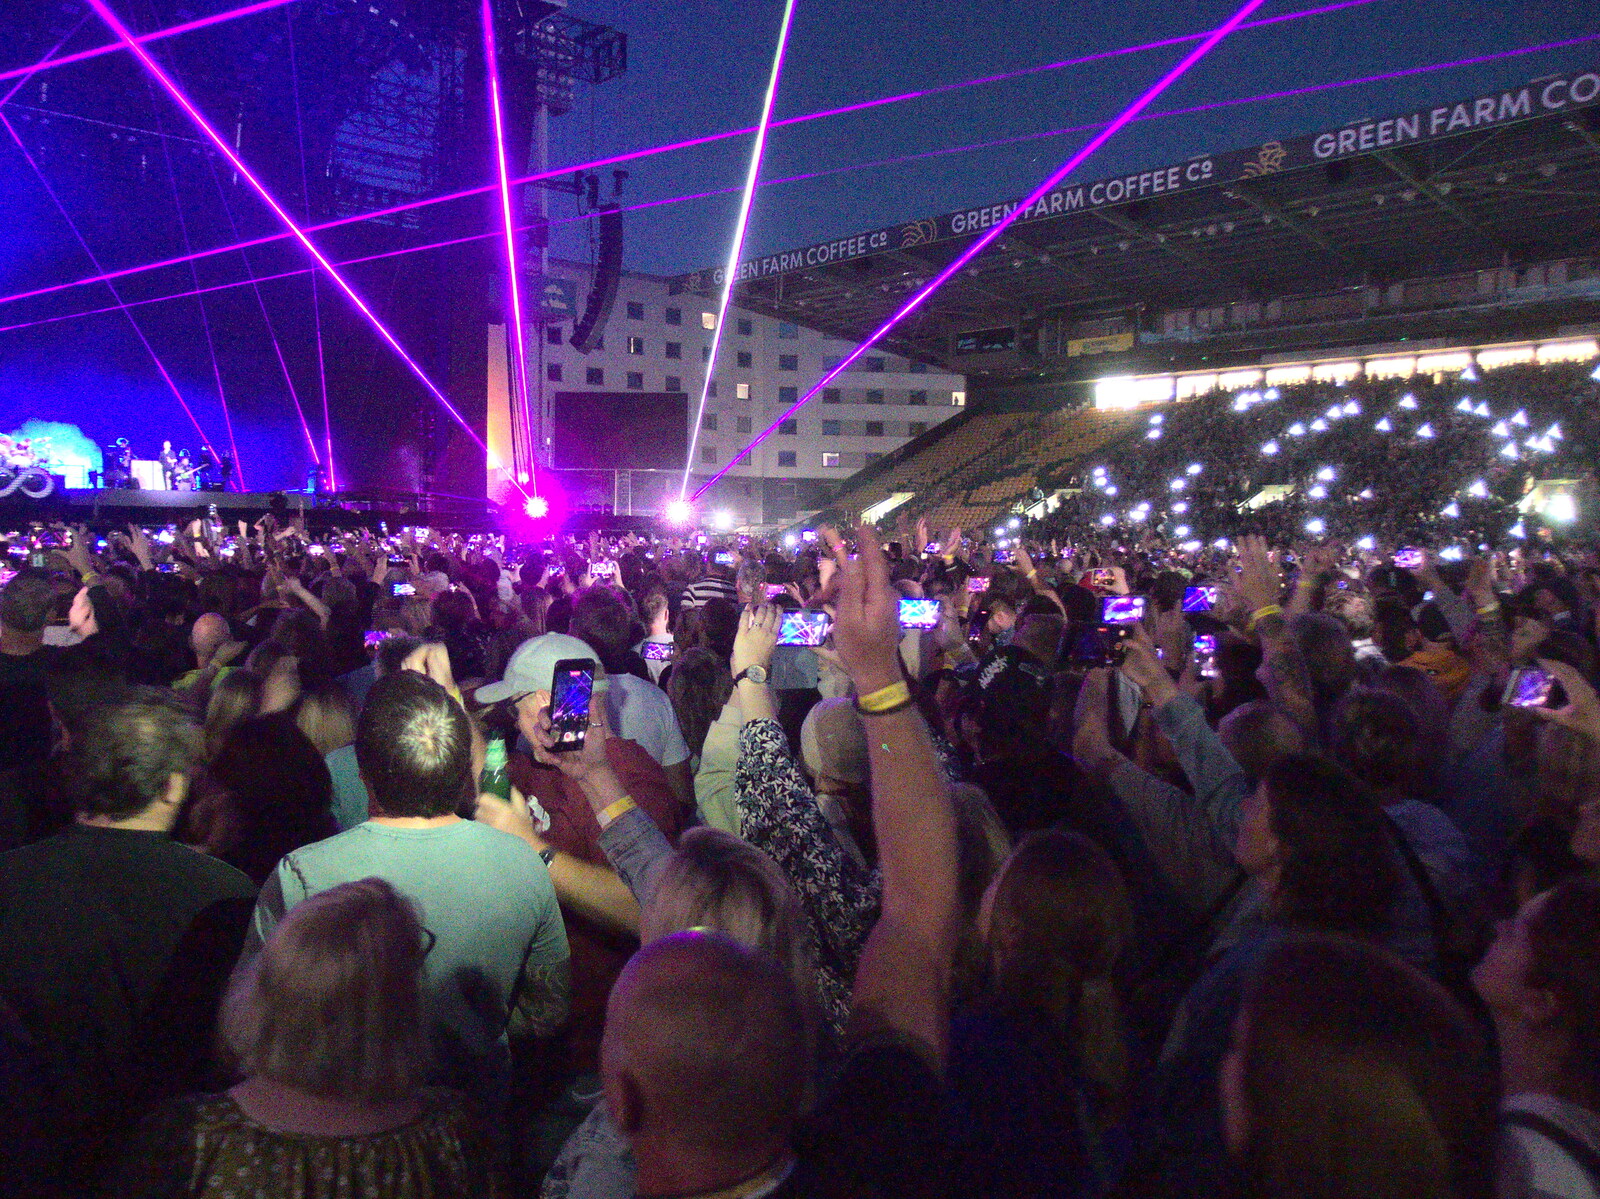 The Killers at Carrow Road, Norwich, Norfolk - 9th June 2022: Laser action over the crowds